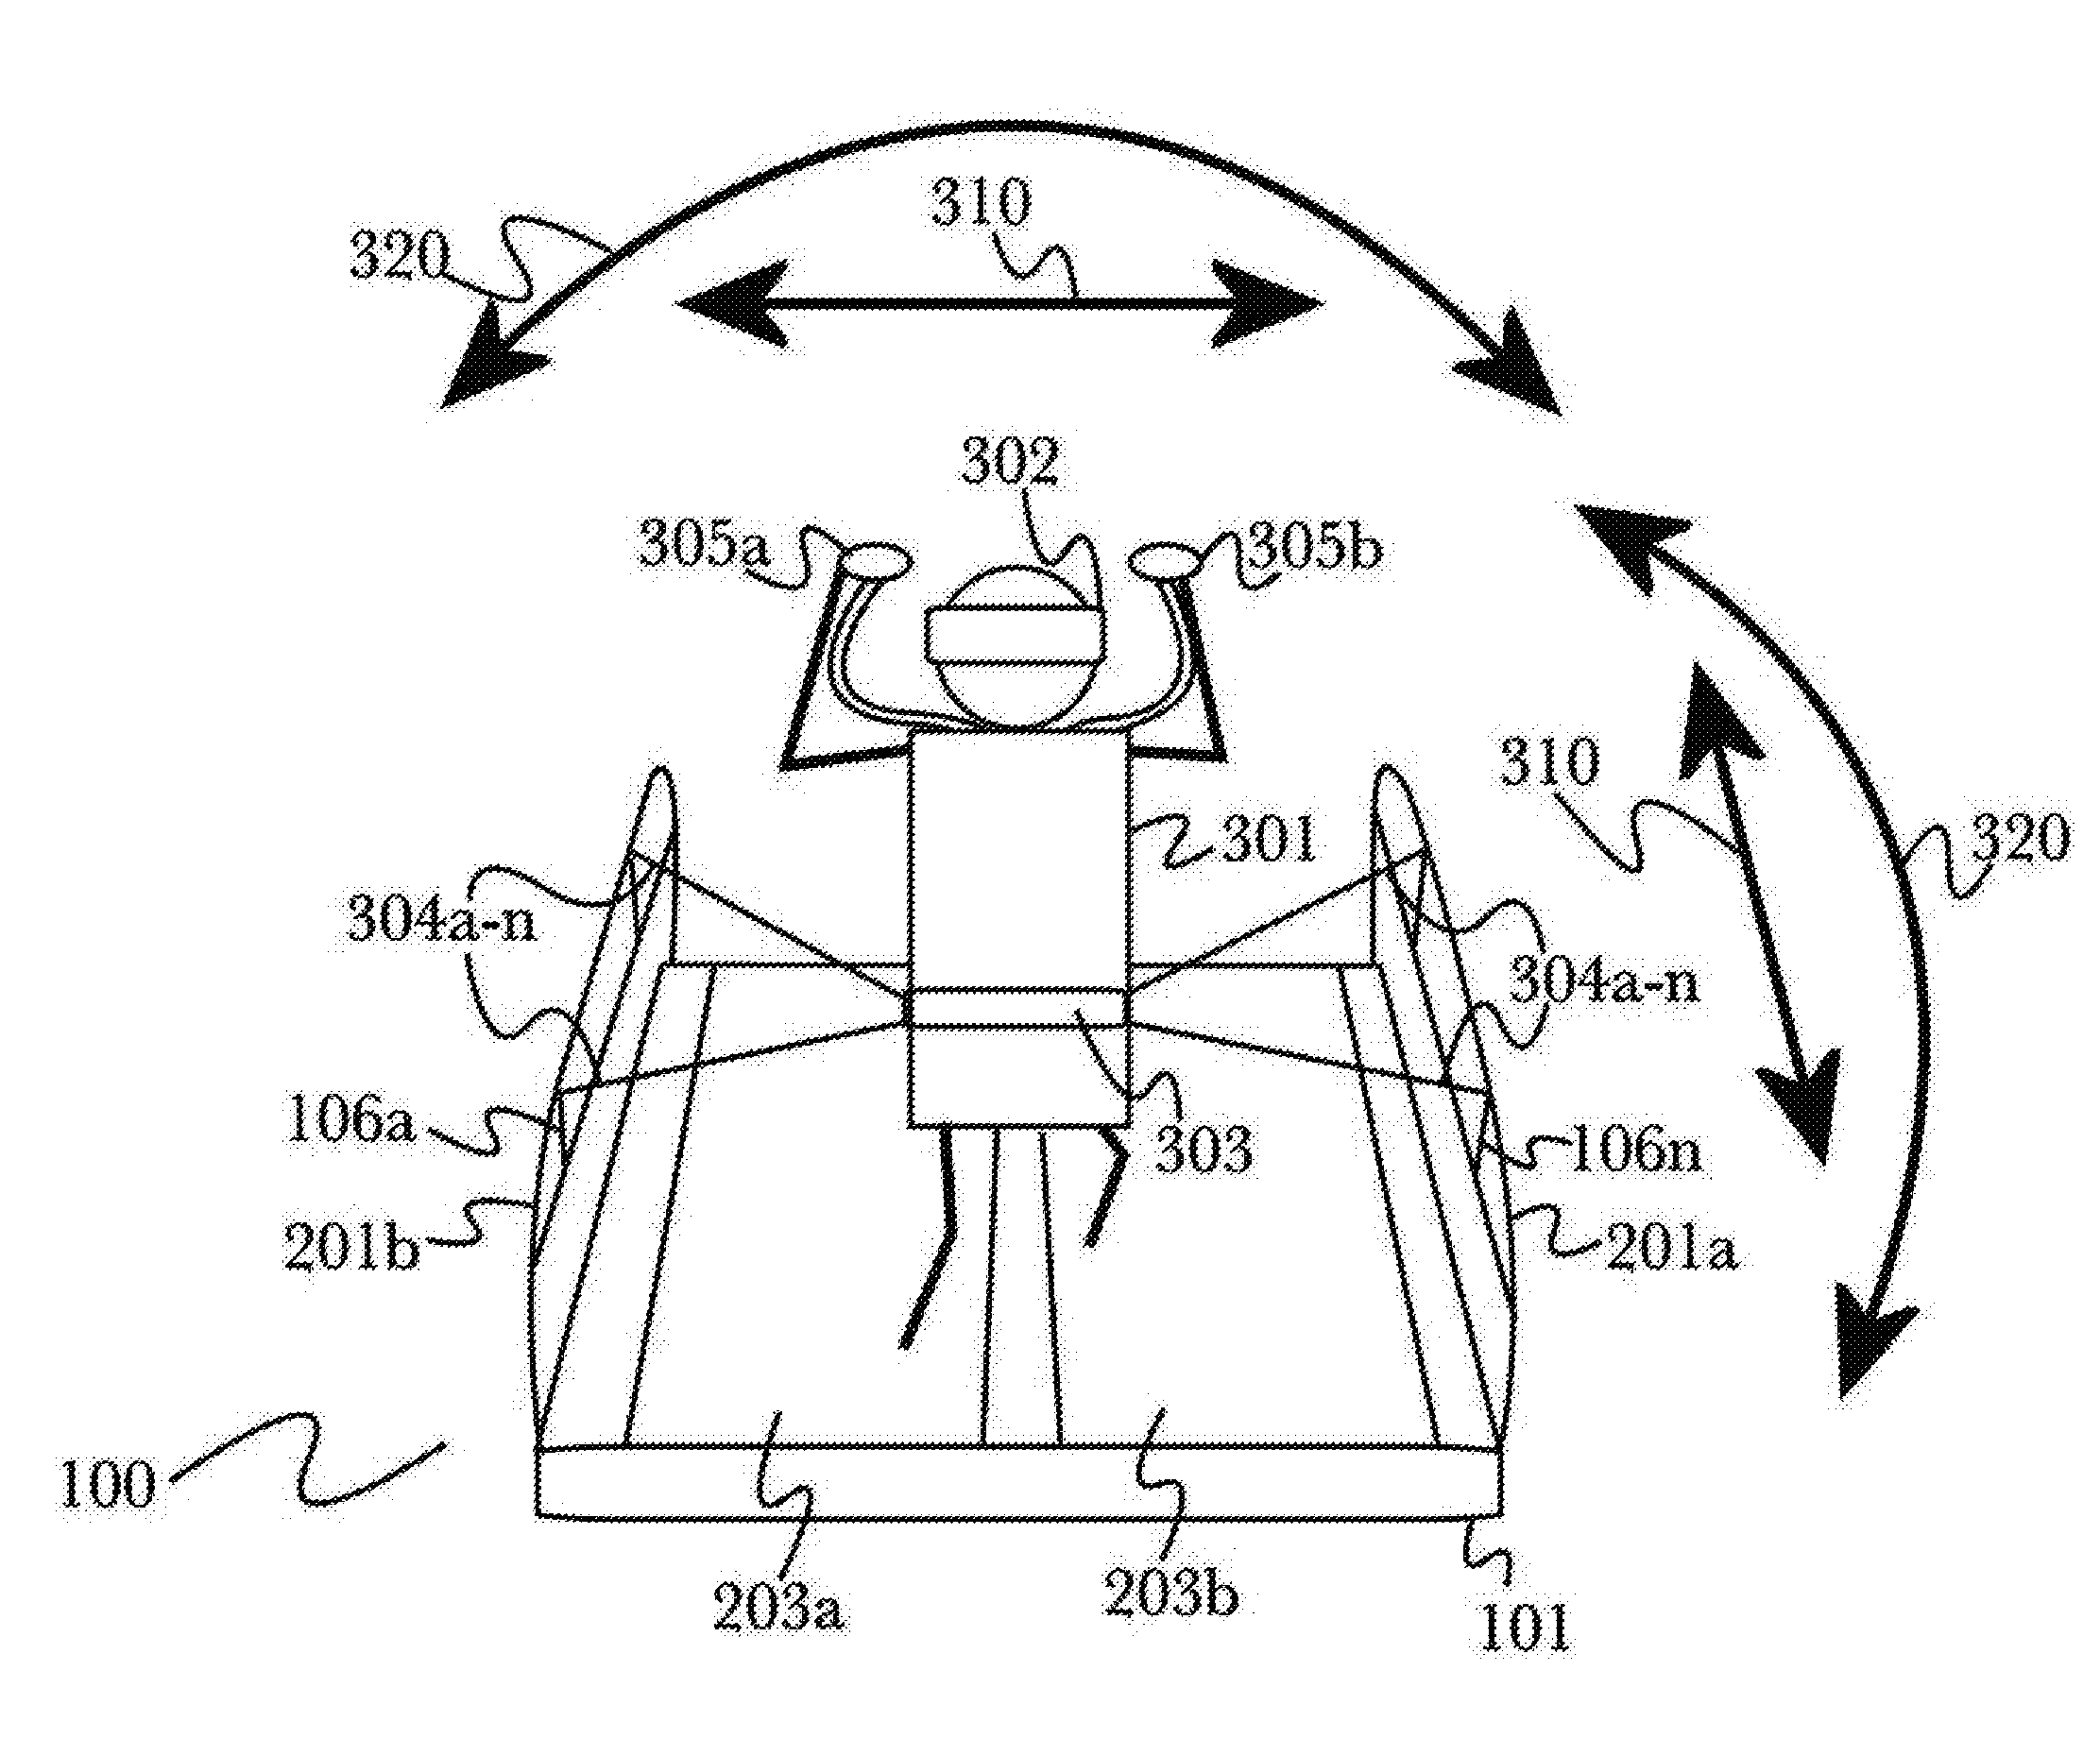 Variable-resistance exercise machine with wireless communication for smart device control and interactive software applications